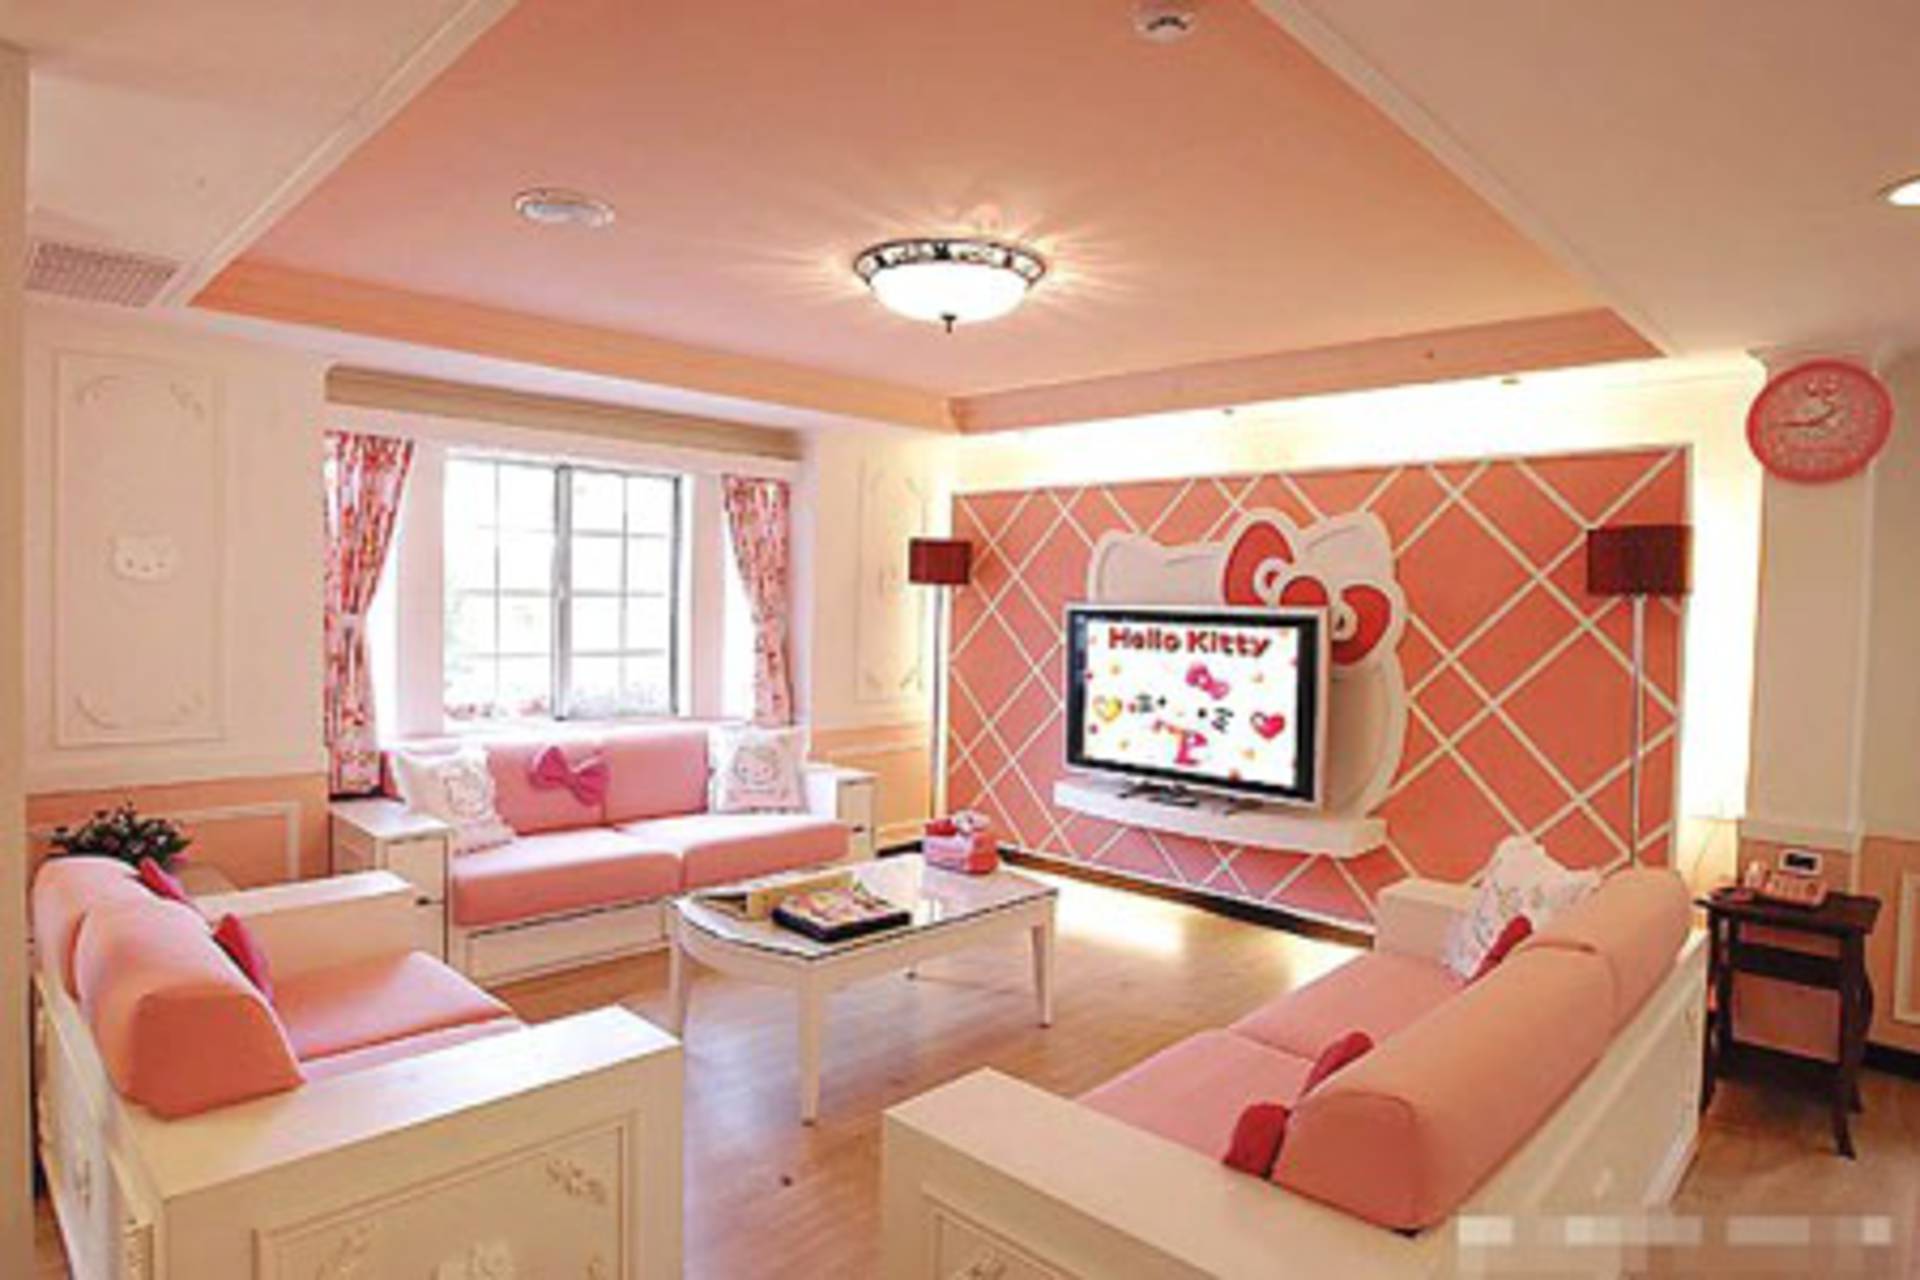 The House  Of A Dream Coloured Pink Hello  Kitty  Theme 